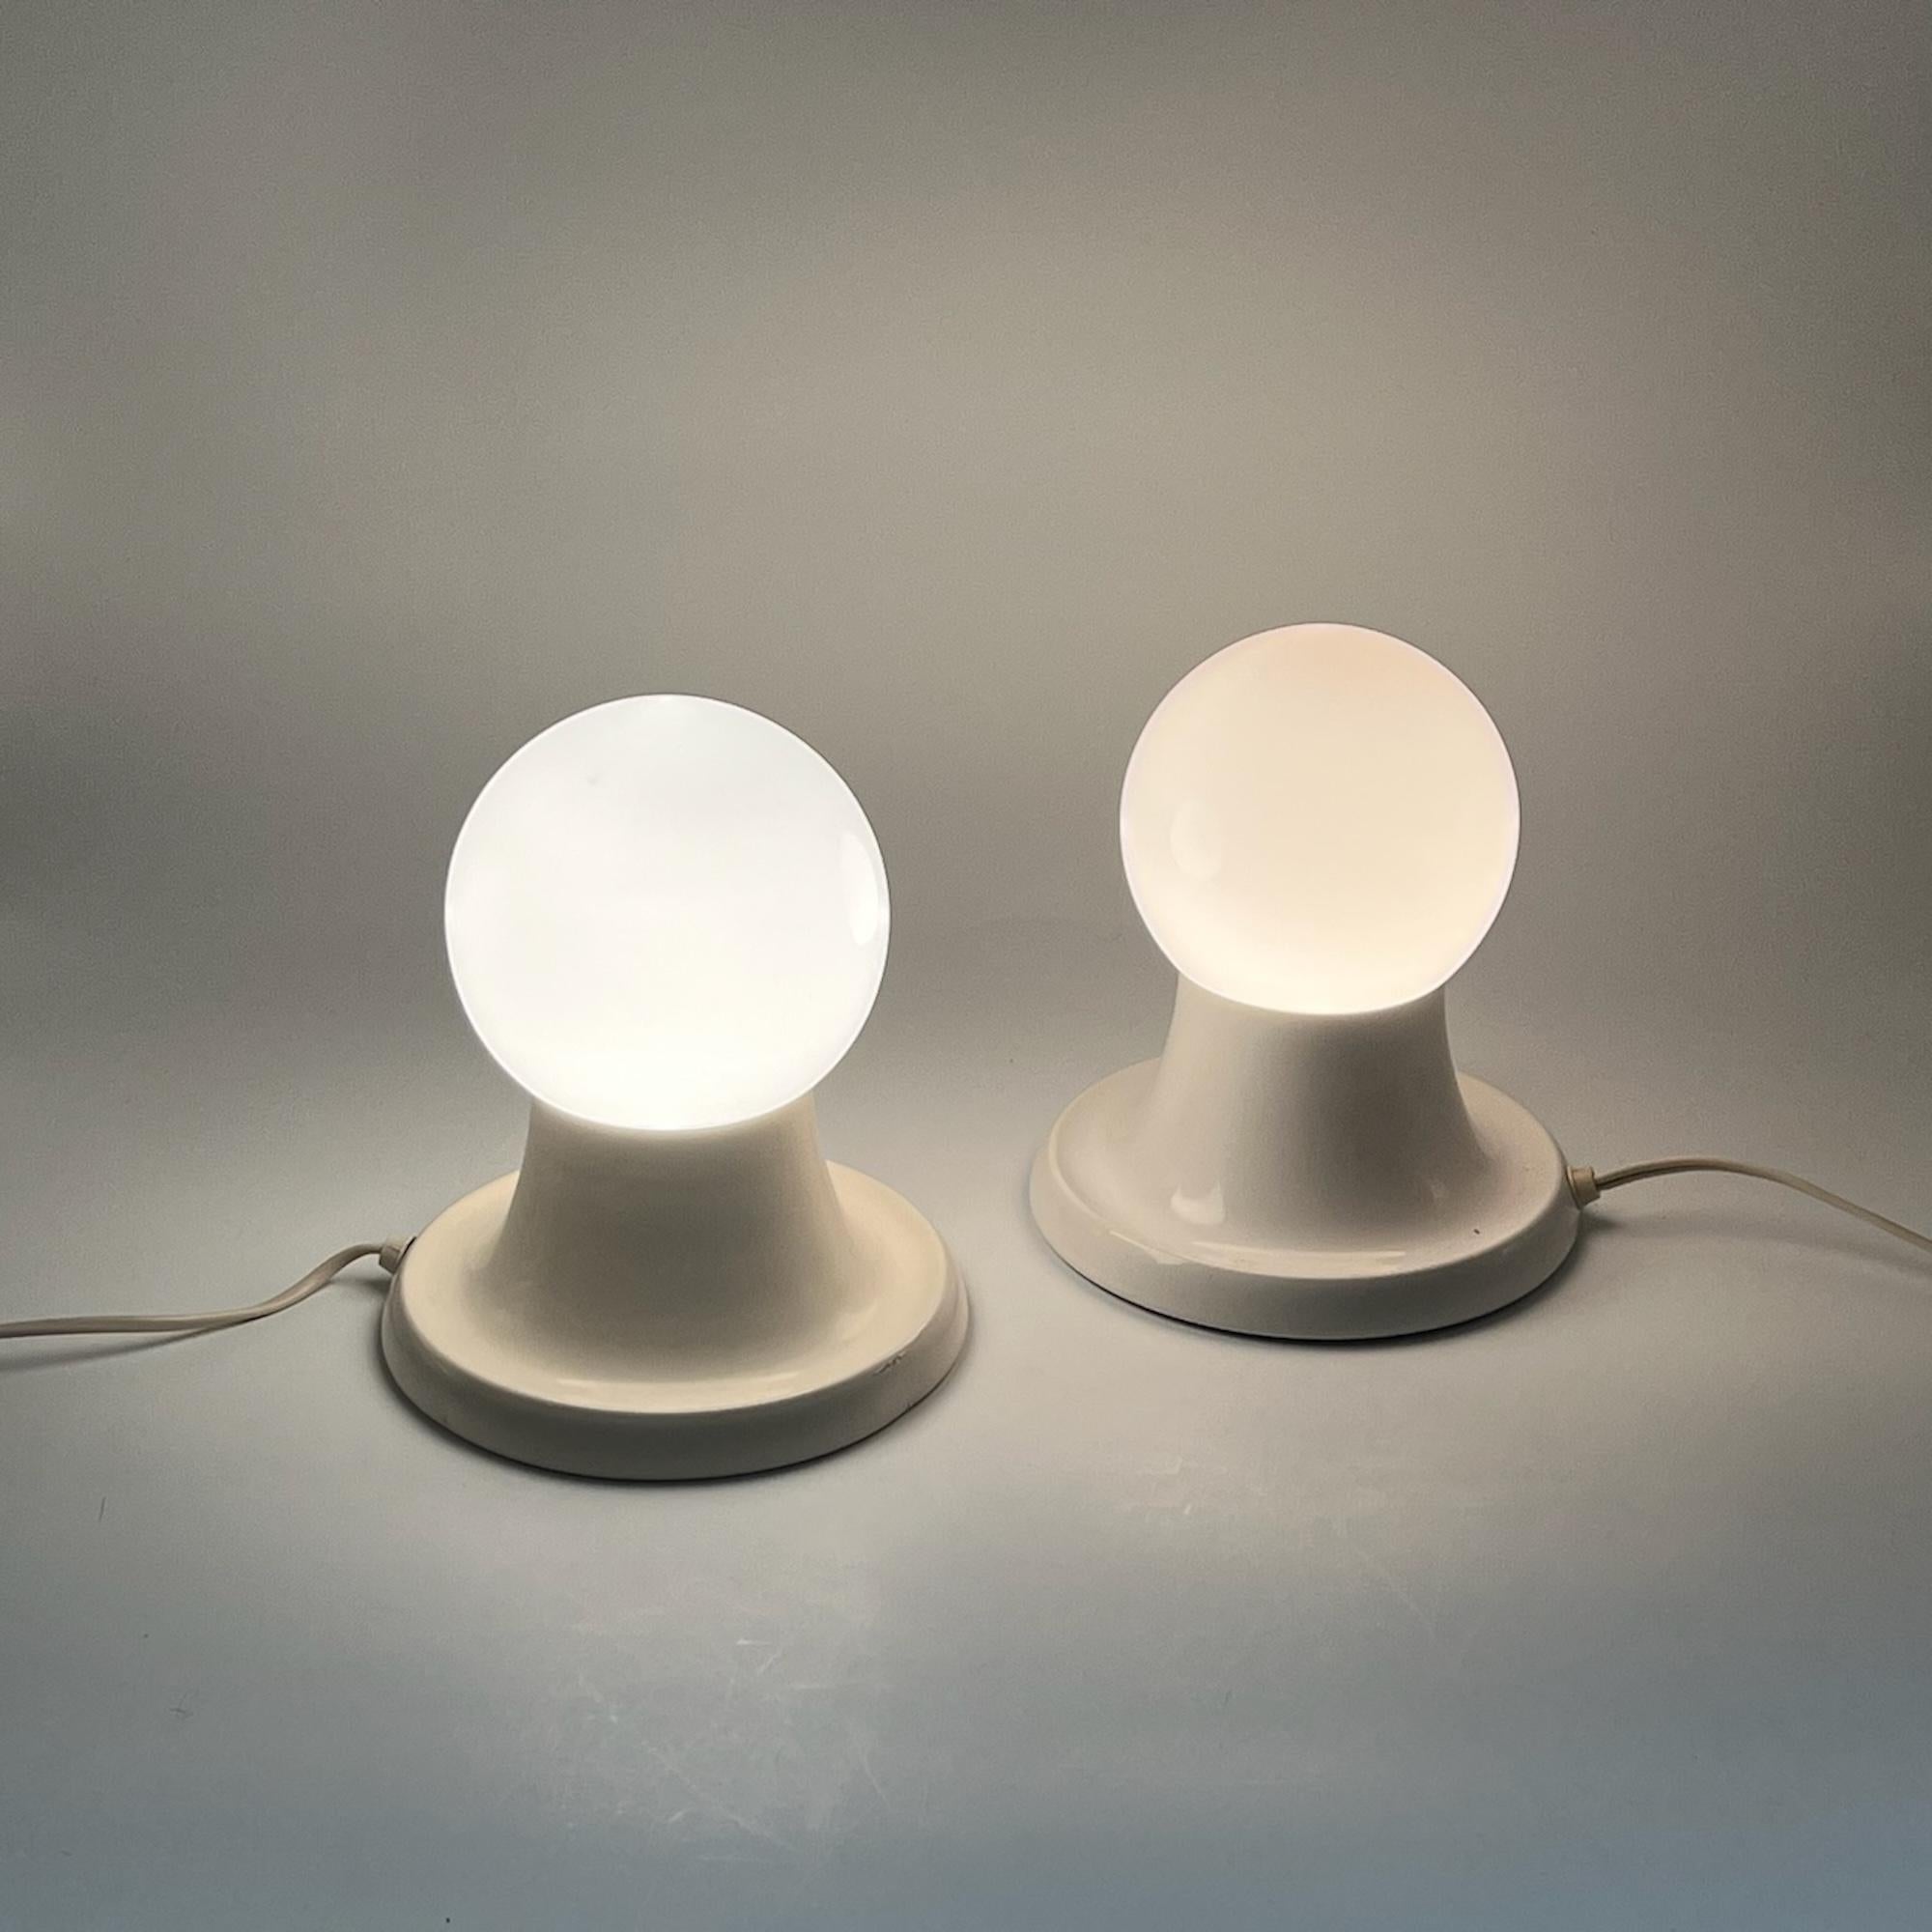 Iconic pair of 'Light Ball' table lamps - designed by Achille and Piergiacomo Castiglioni for Flos in 1961. White lacquered metal base with opaline glass bowl.
Iconic pair of ‘Light Ball’ table lamps – designed by Achille and Piergiacomo Castiglioni